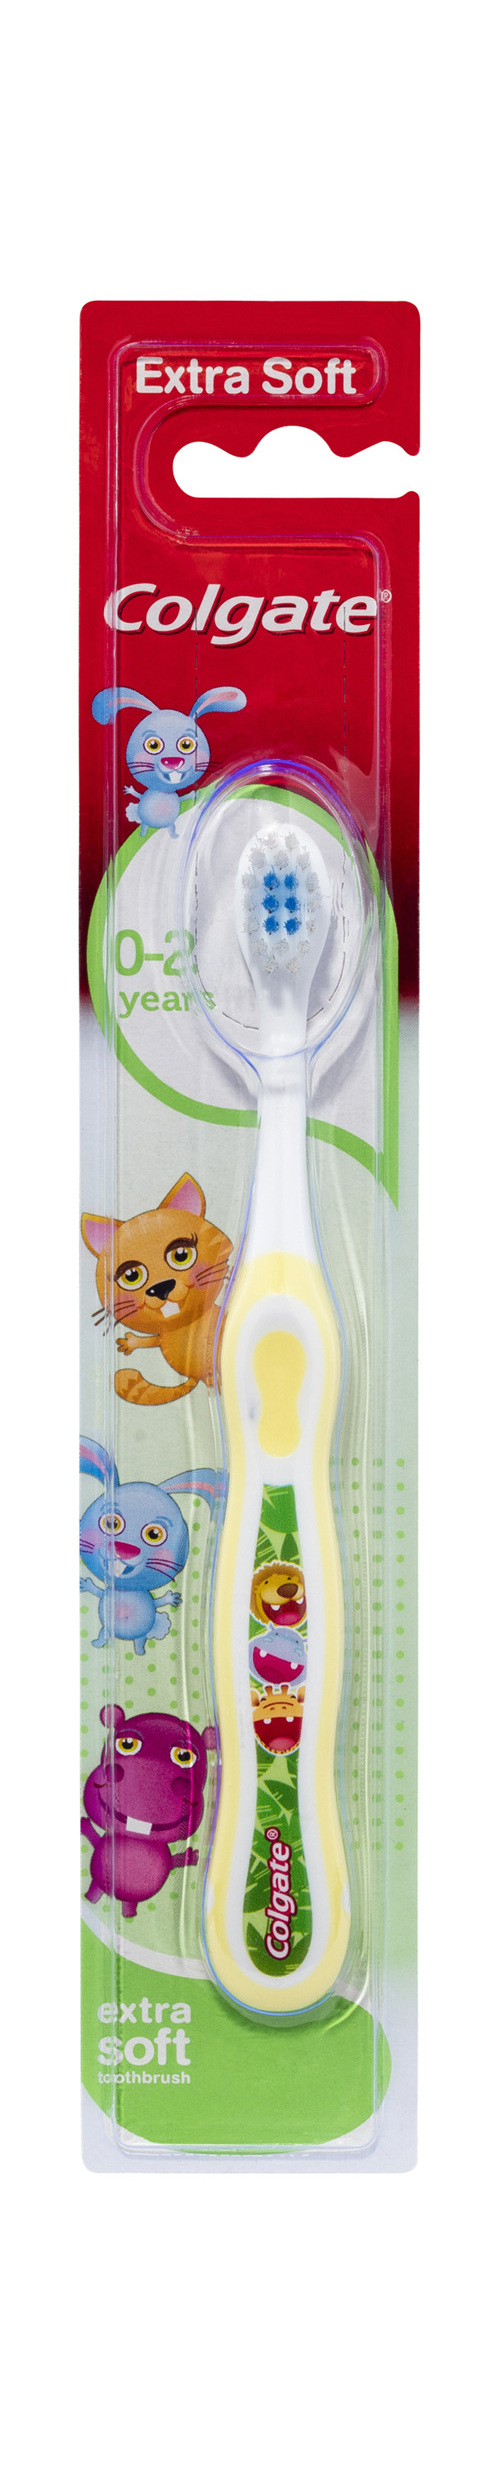 Colgate Kids My First Manual Toothbrush for Toddlers 0-2 Years, 1 Pack, Extra Soft Bristles,